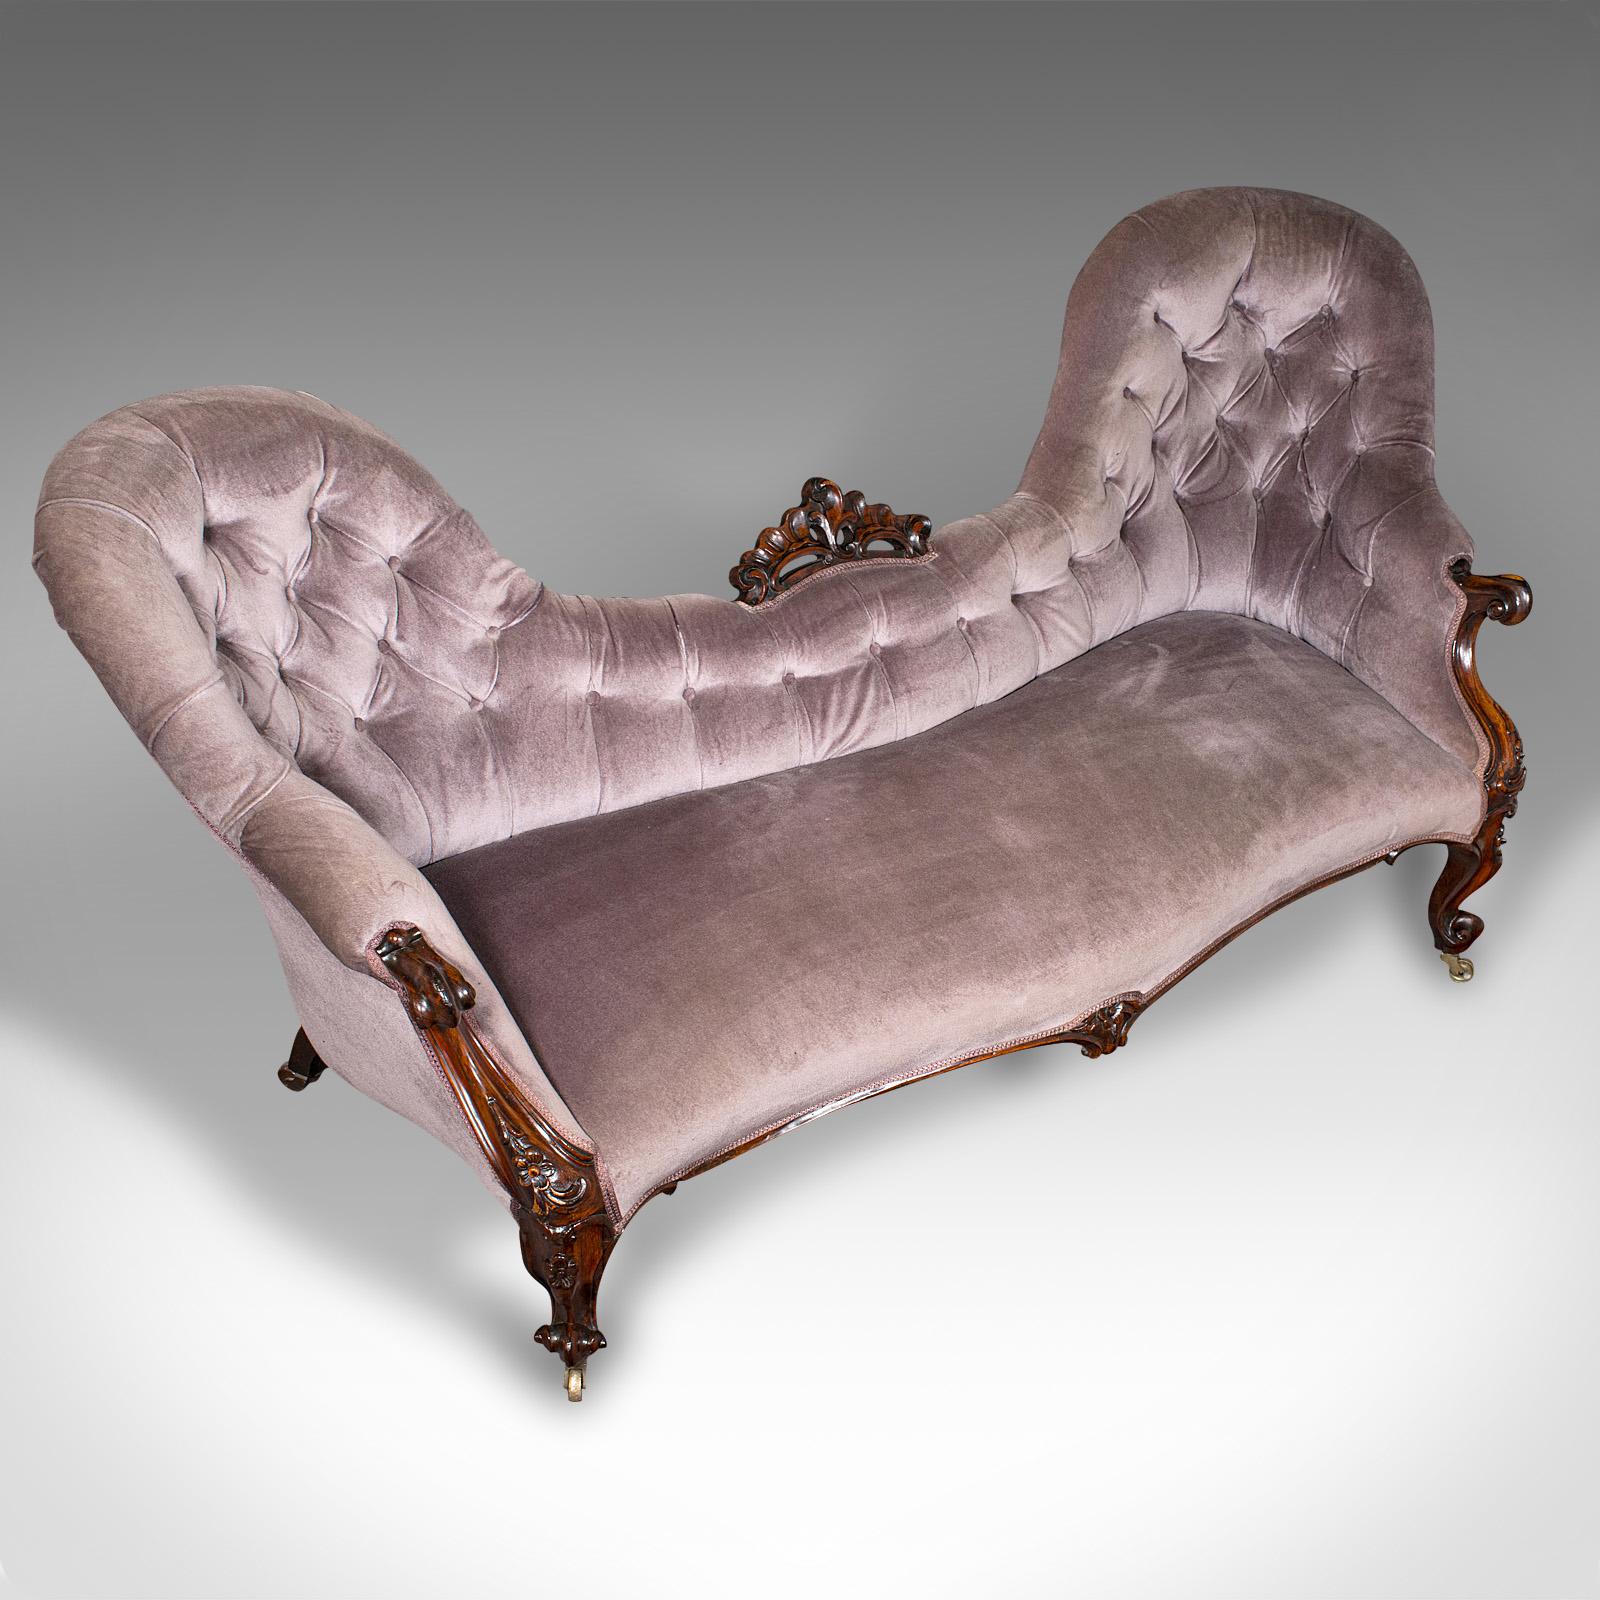 Upholstery Antique Double Spoon Back Settee, English, 3 Seat, Sofa, Early Victorian, C.1840 For Sale